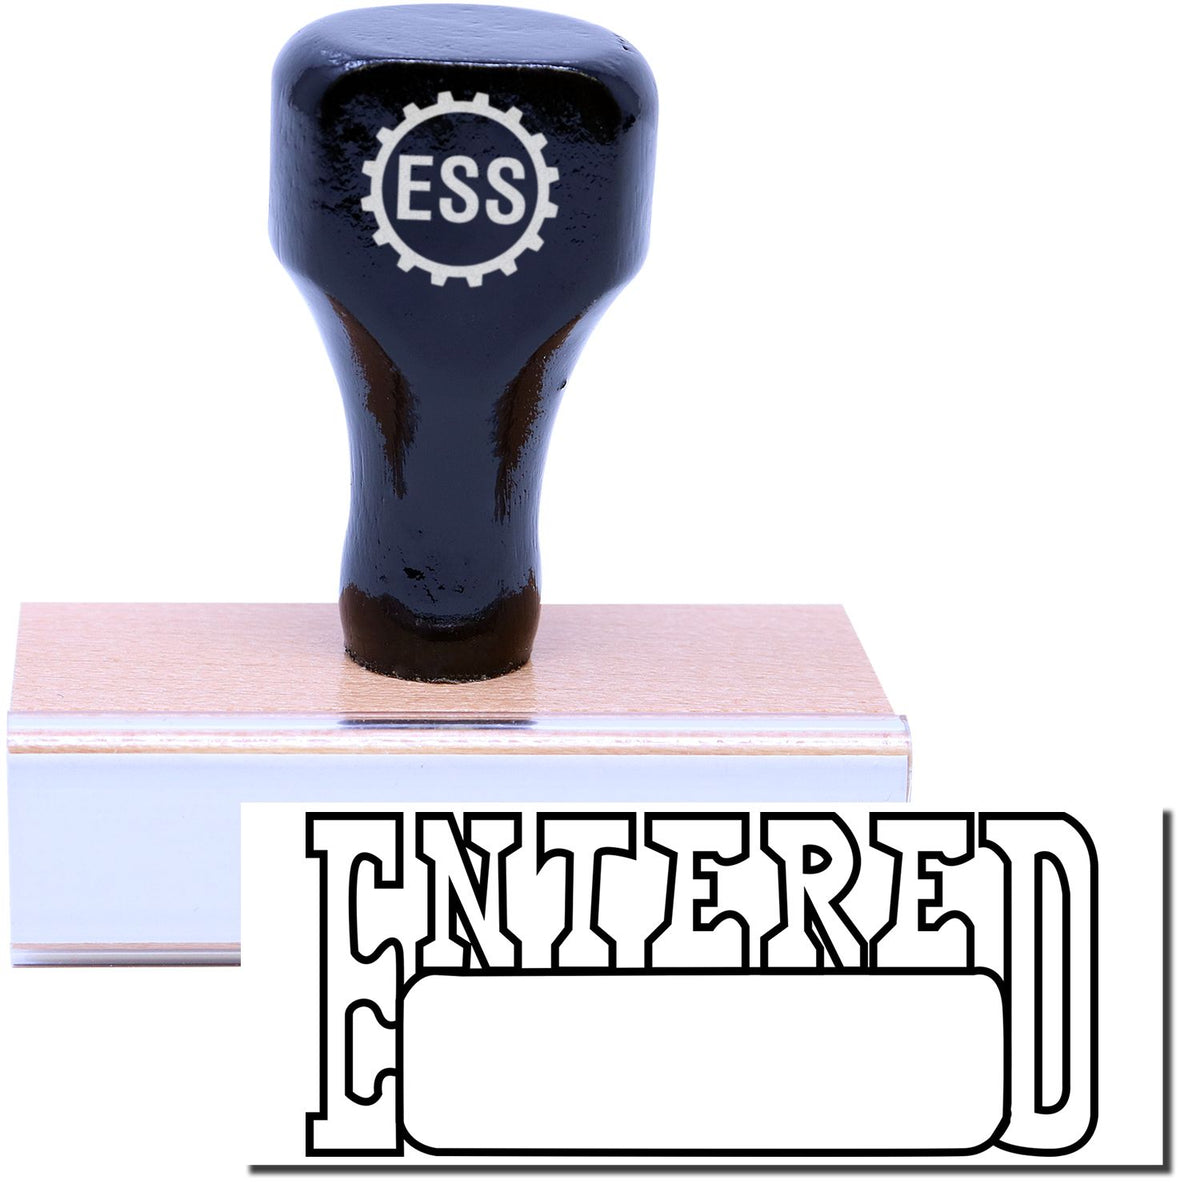 A stock office rubber stamp with a stamped image showing how the text &quot;ENTERED&quot; in an outline font with a date box is displayed after stamping.